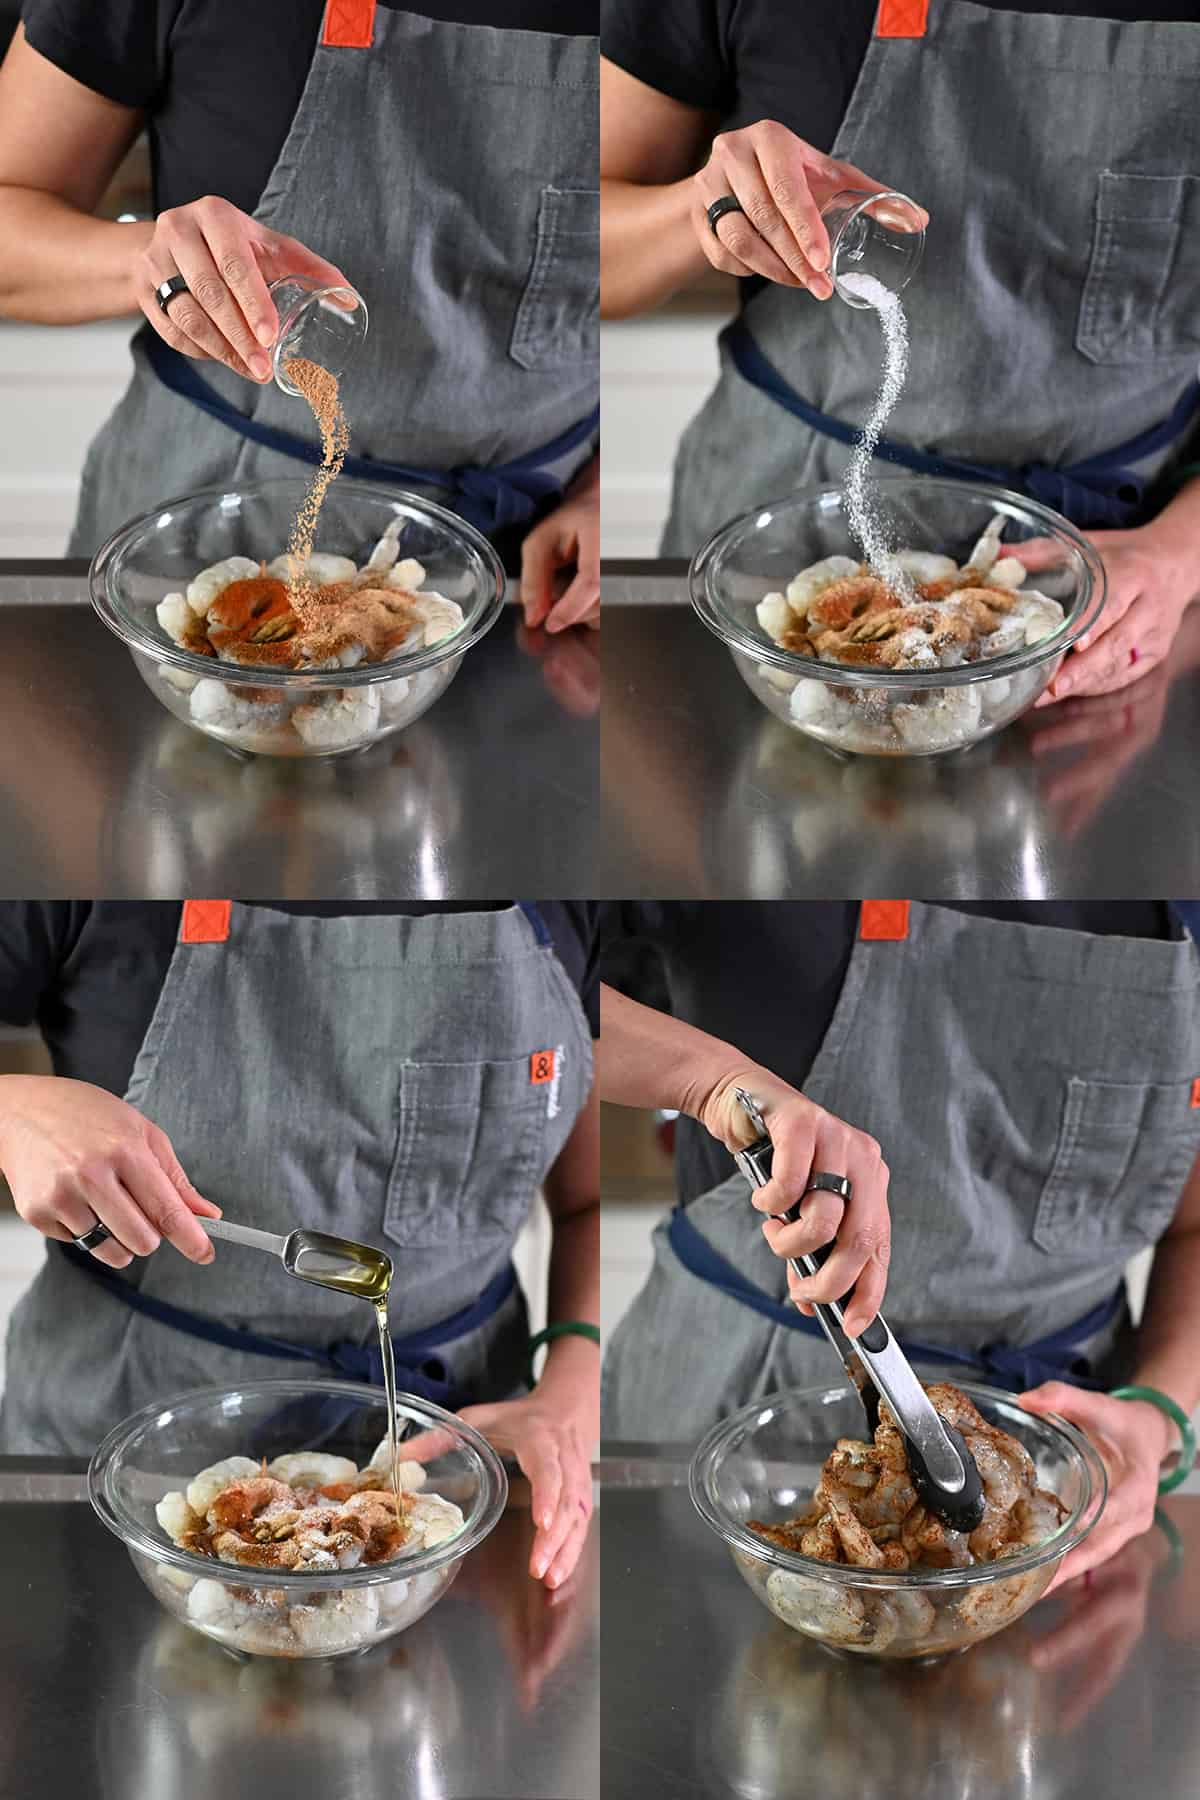 Adding seasoning and oil to a bowl of raw shrimp and tossing everything together with a pair of tongs.